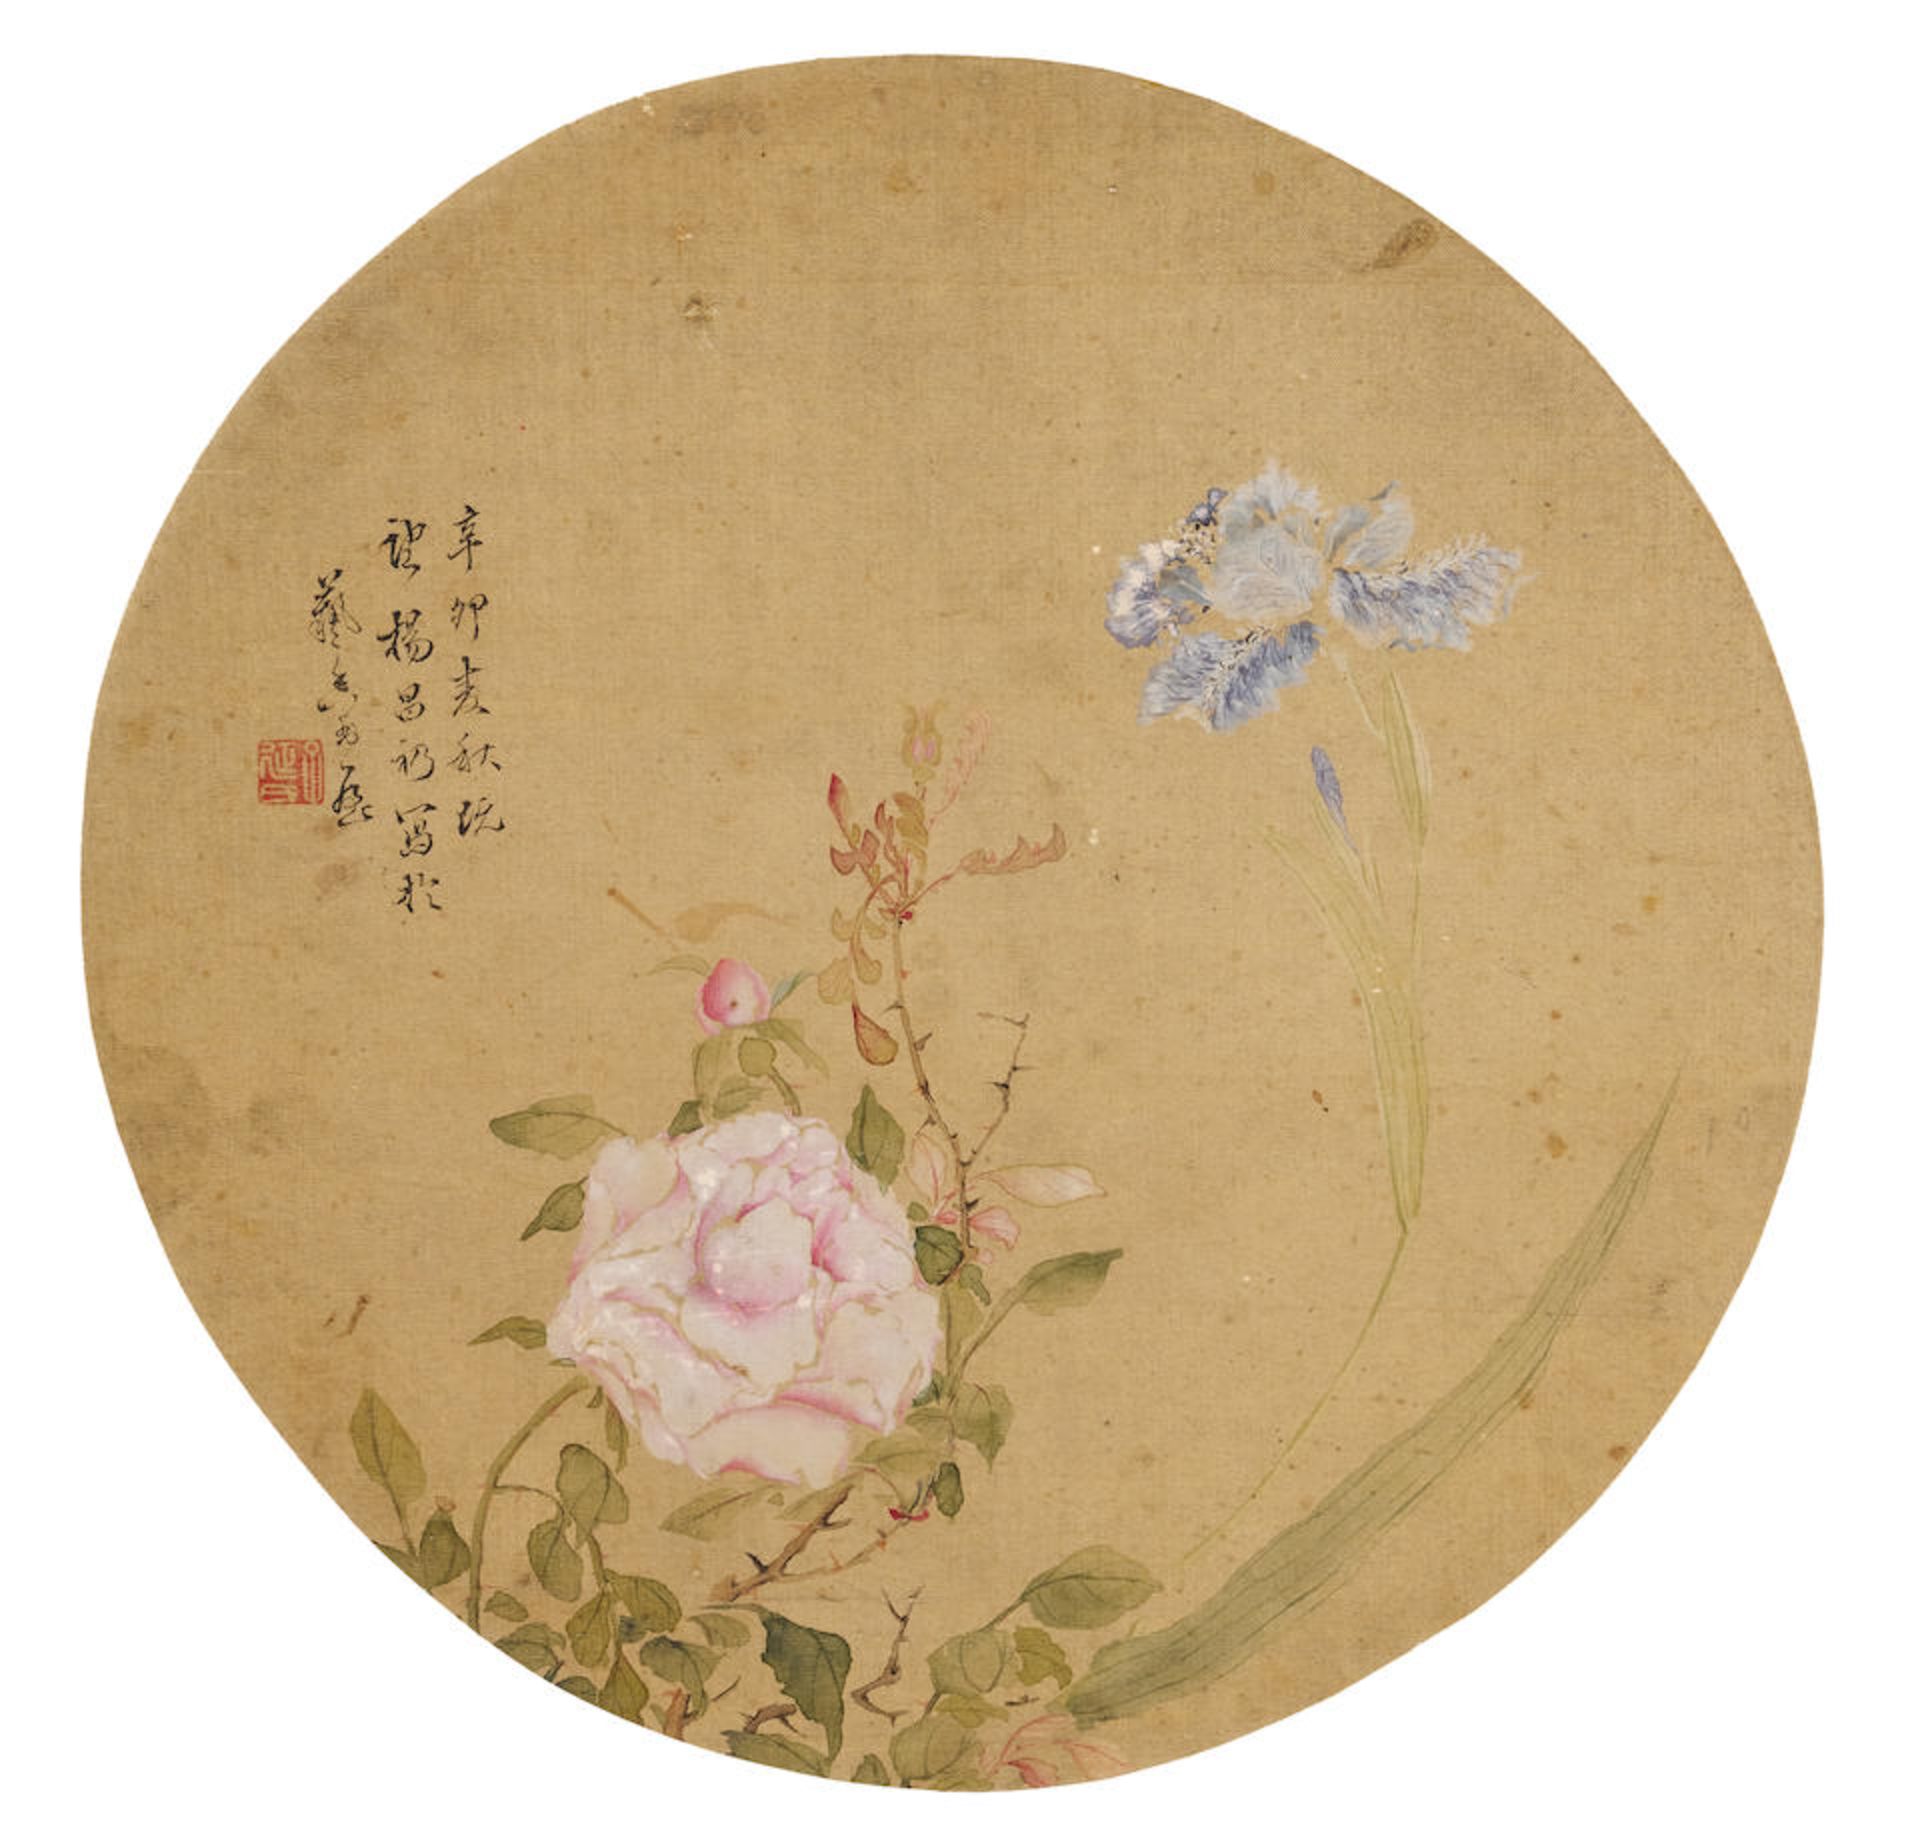 Yang Changreng (19th century) Butterfly and Flower